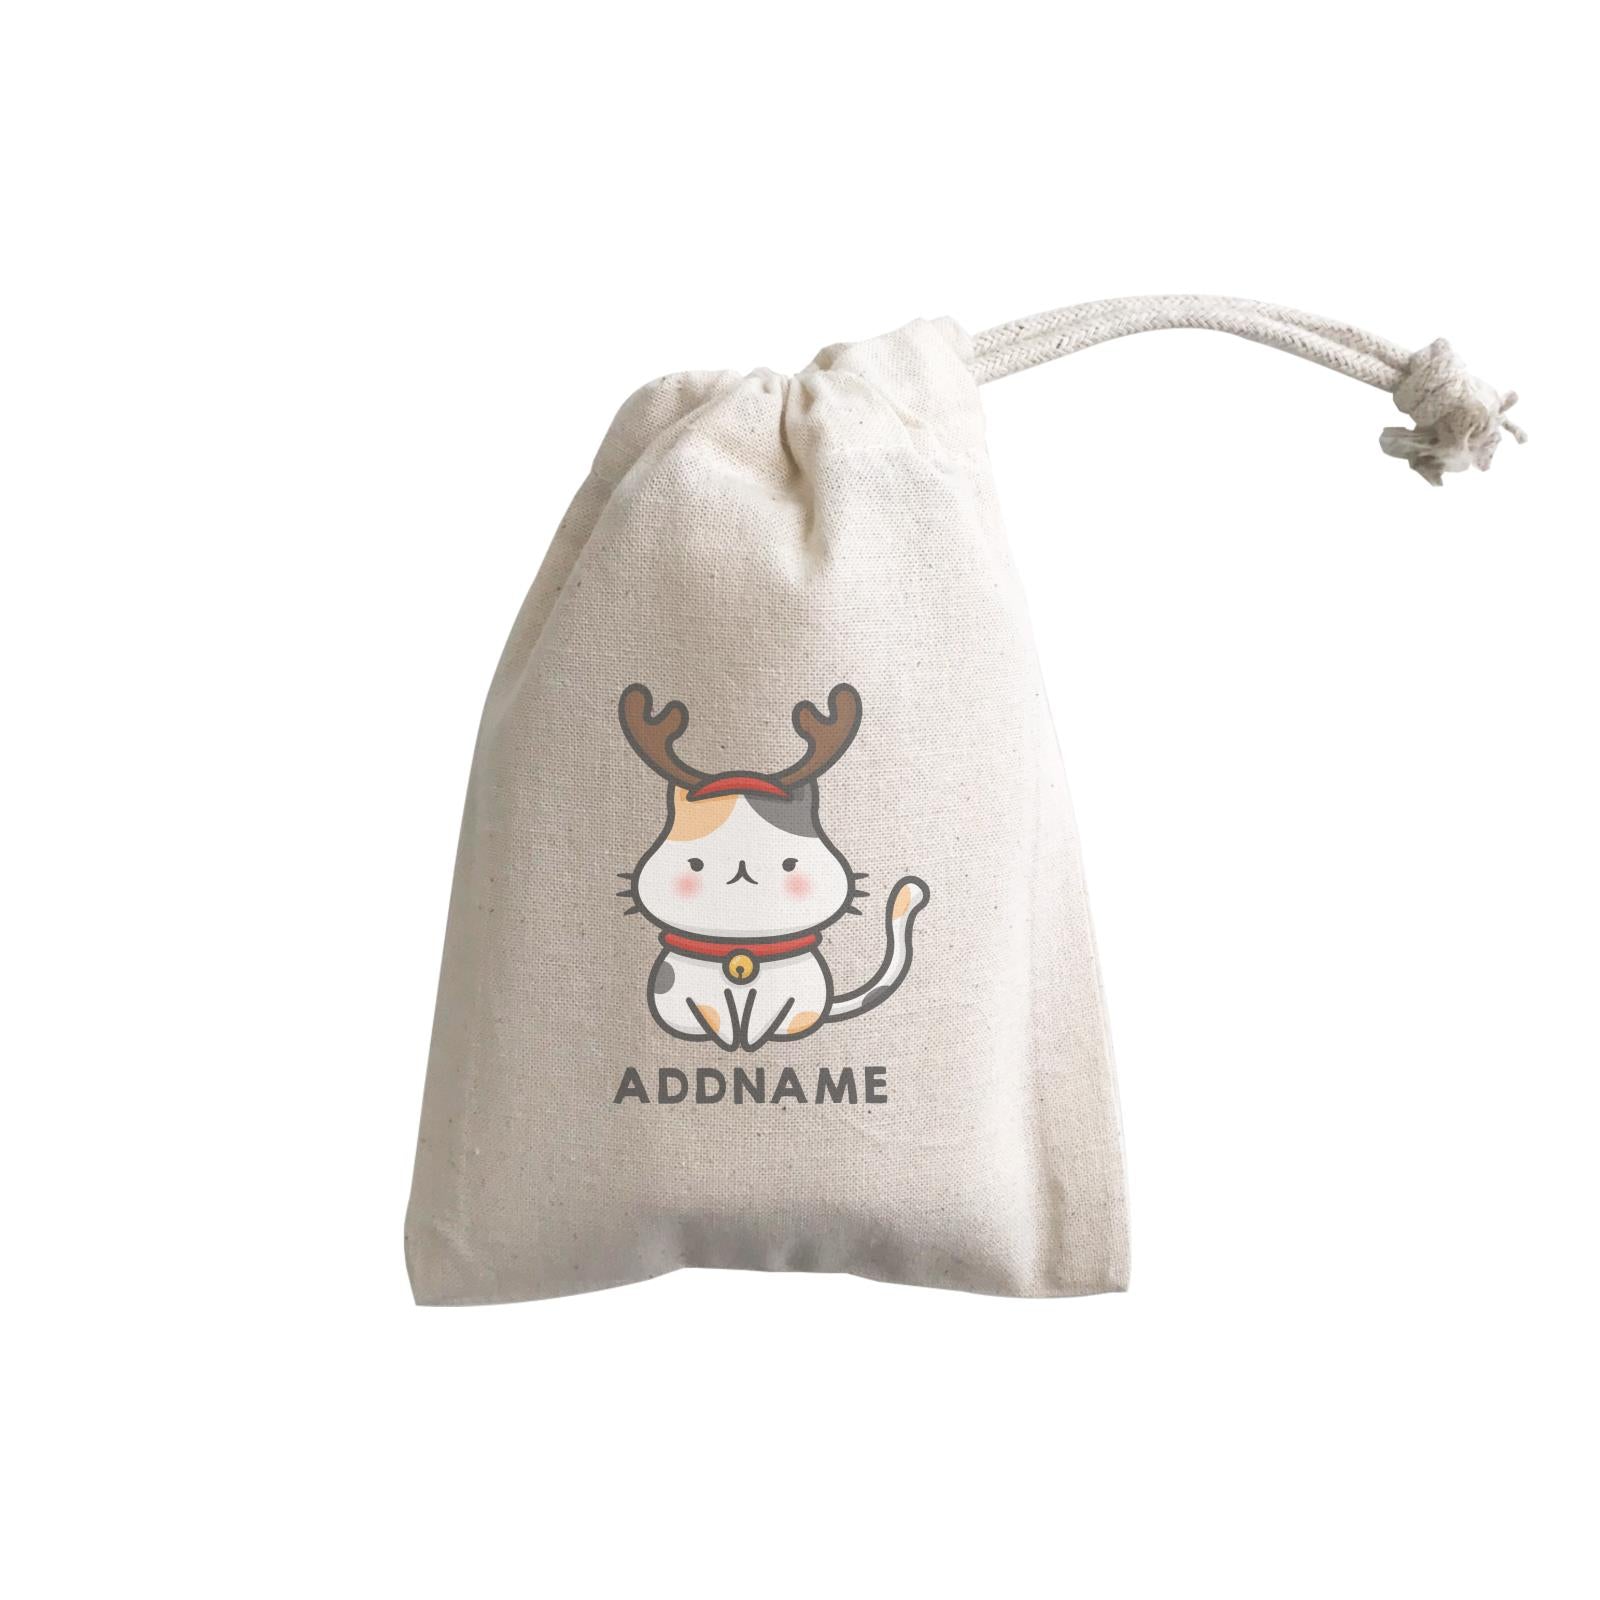 Xmas Cute Cat With Reindeer Antlers Addname GP Gift Pouch